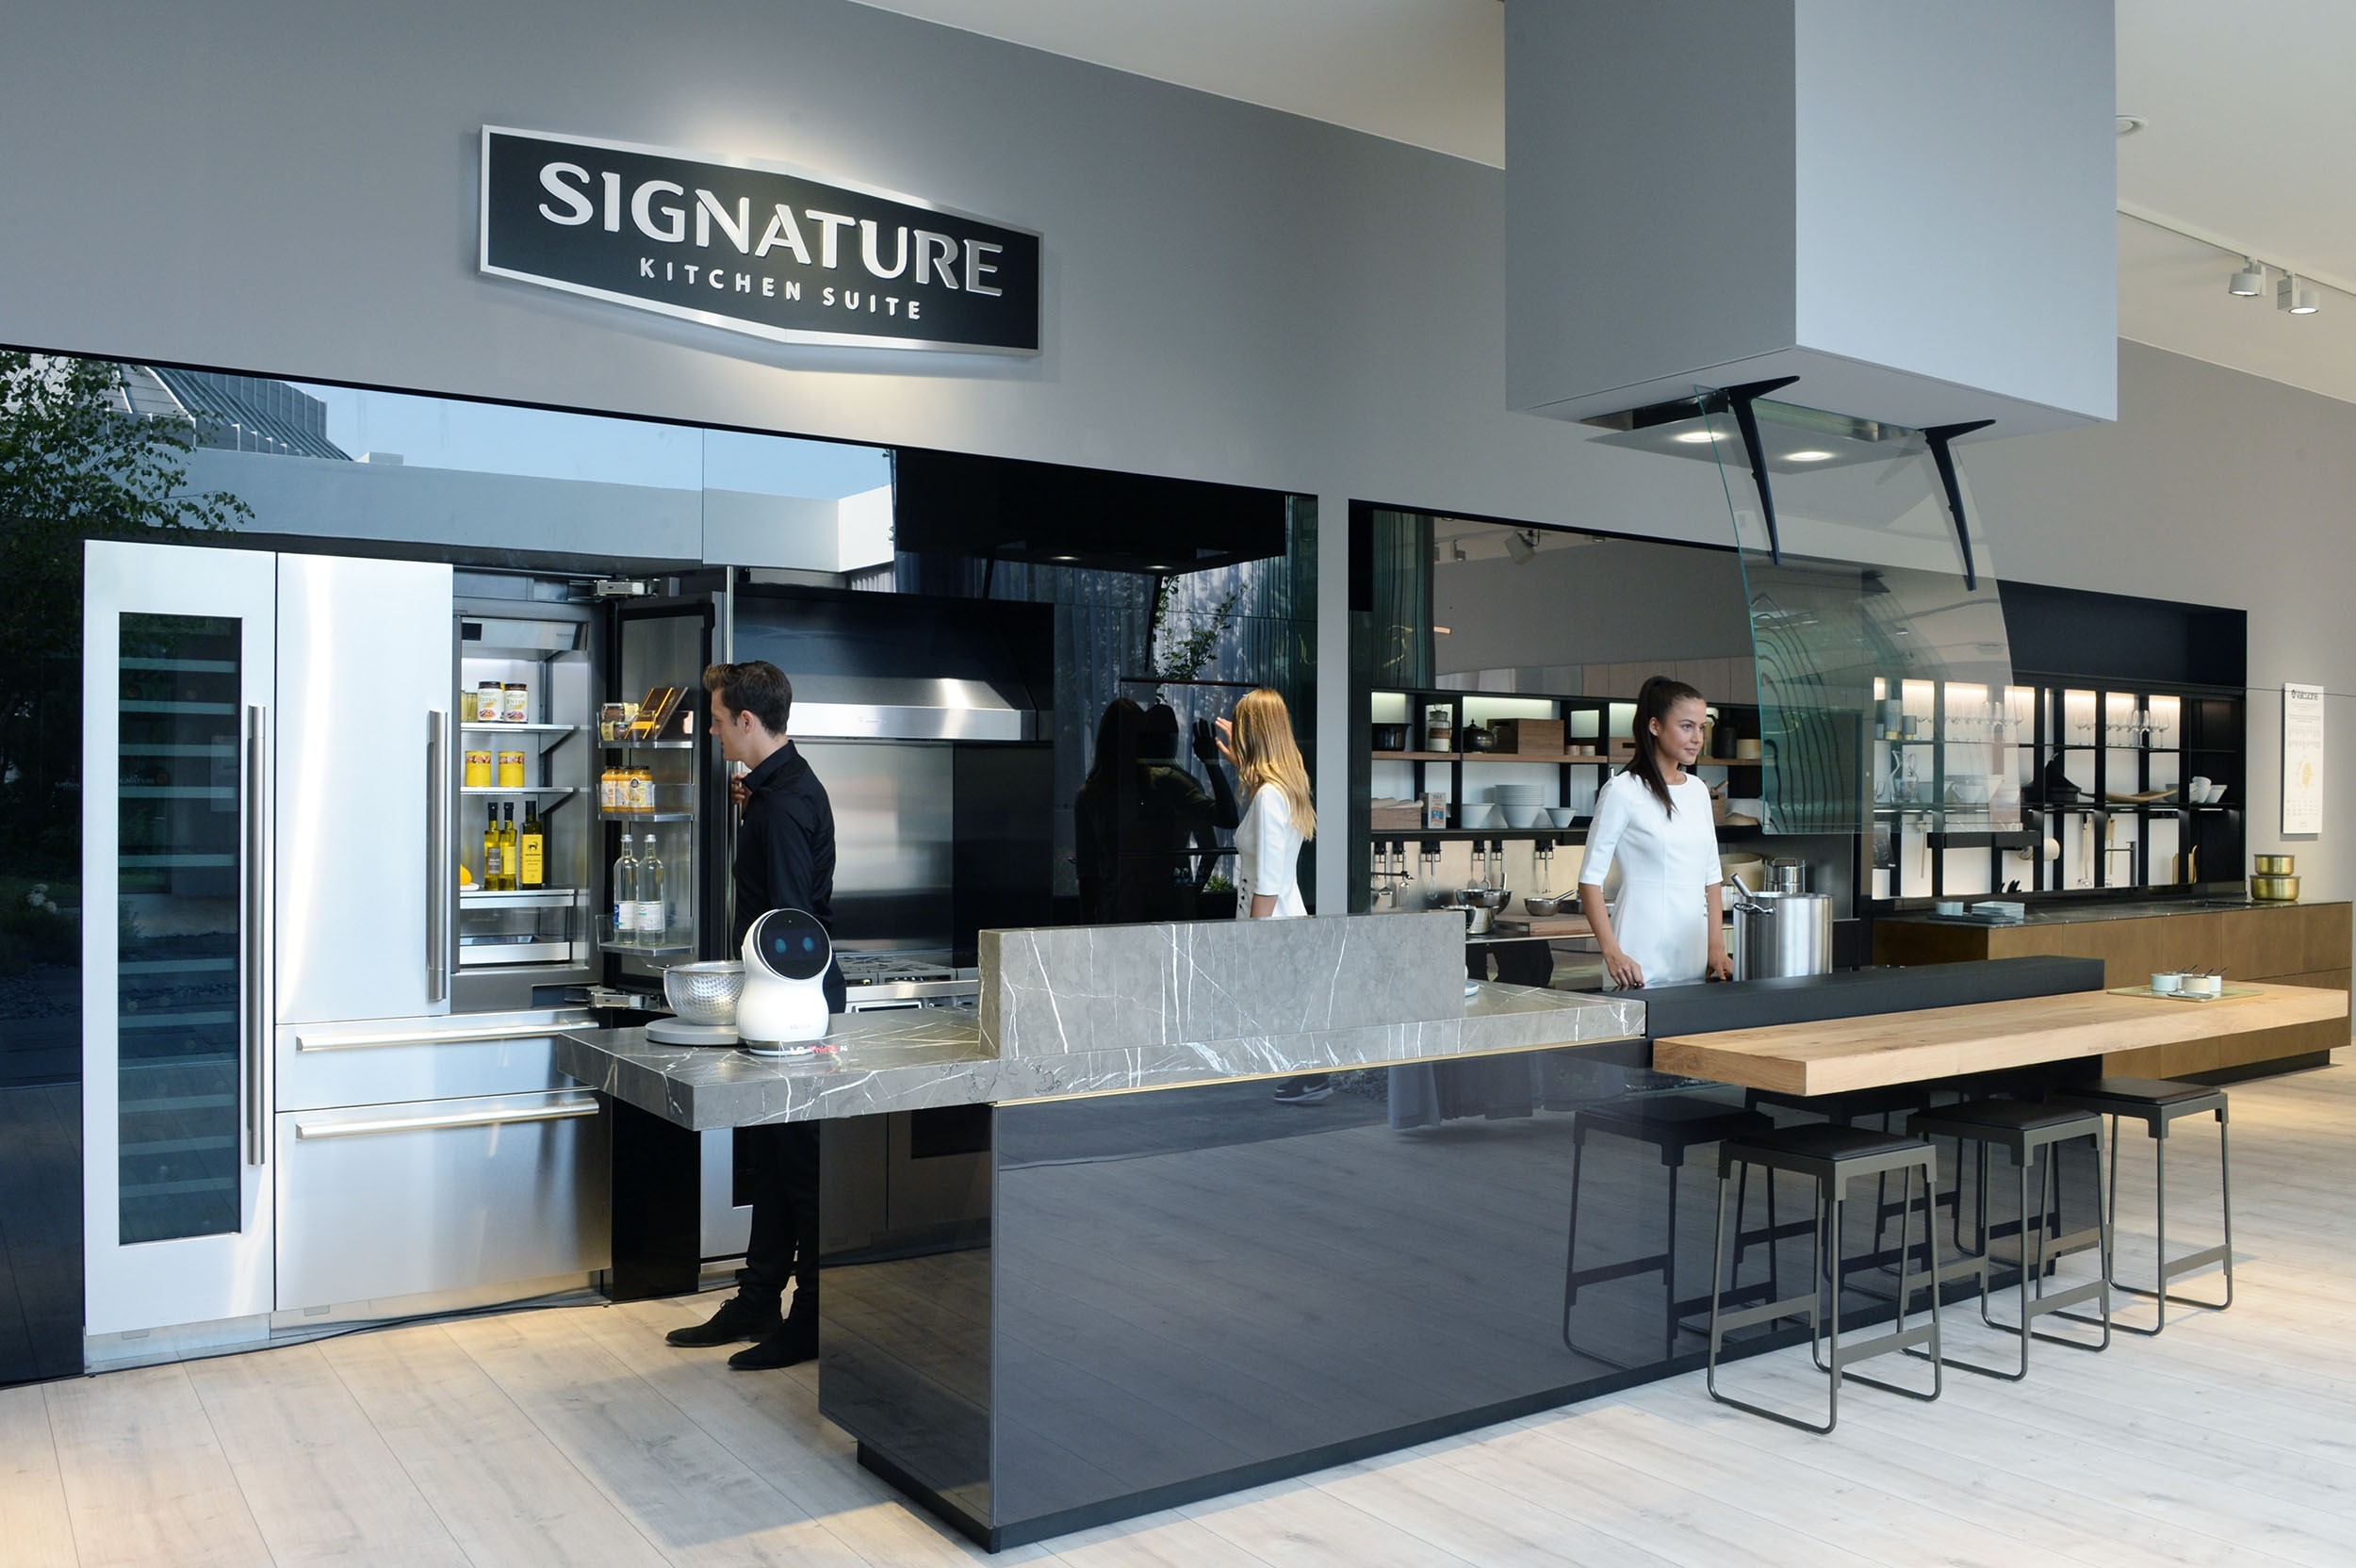 Another view of the LG Signature Kitchen Suite display zone, three models are standing in the kitchen.